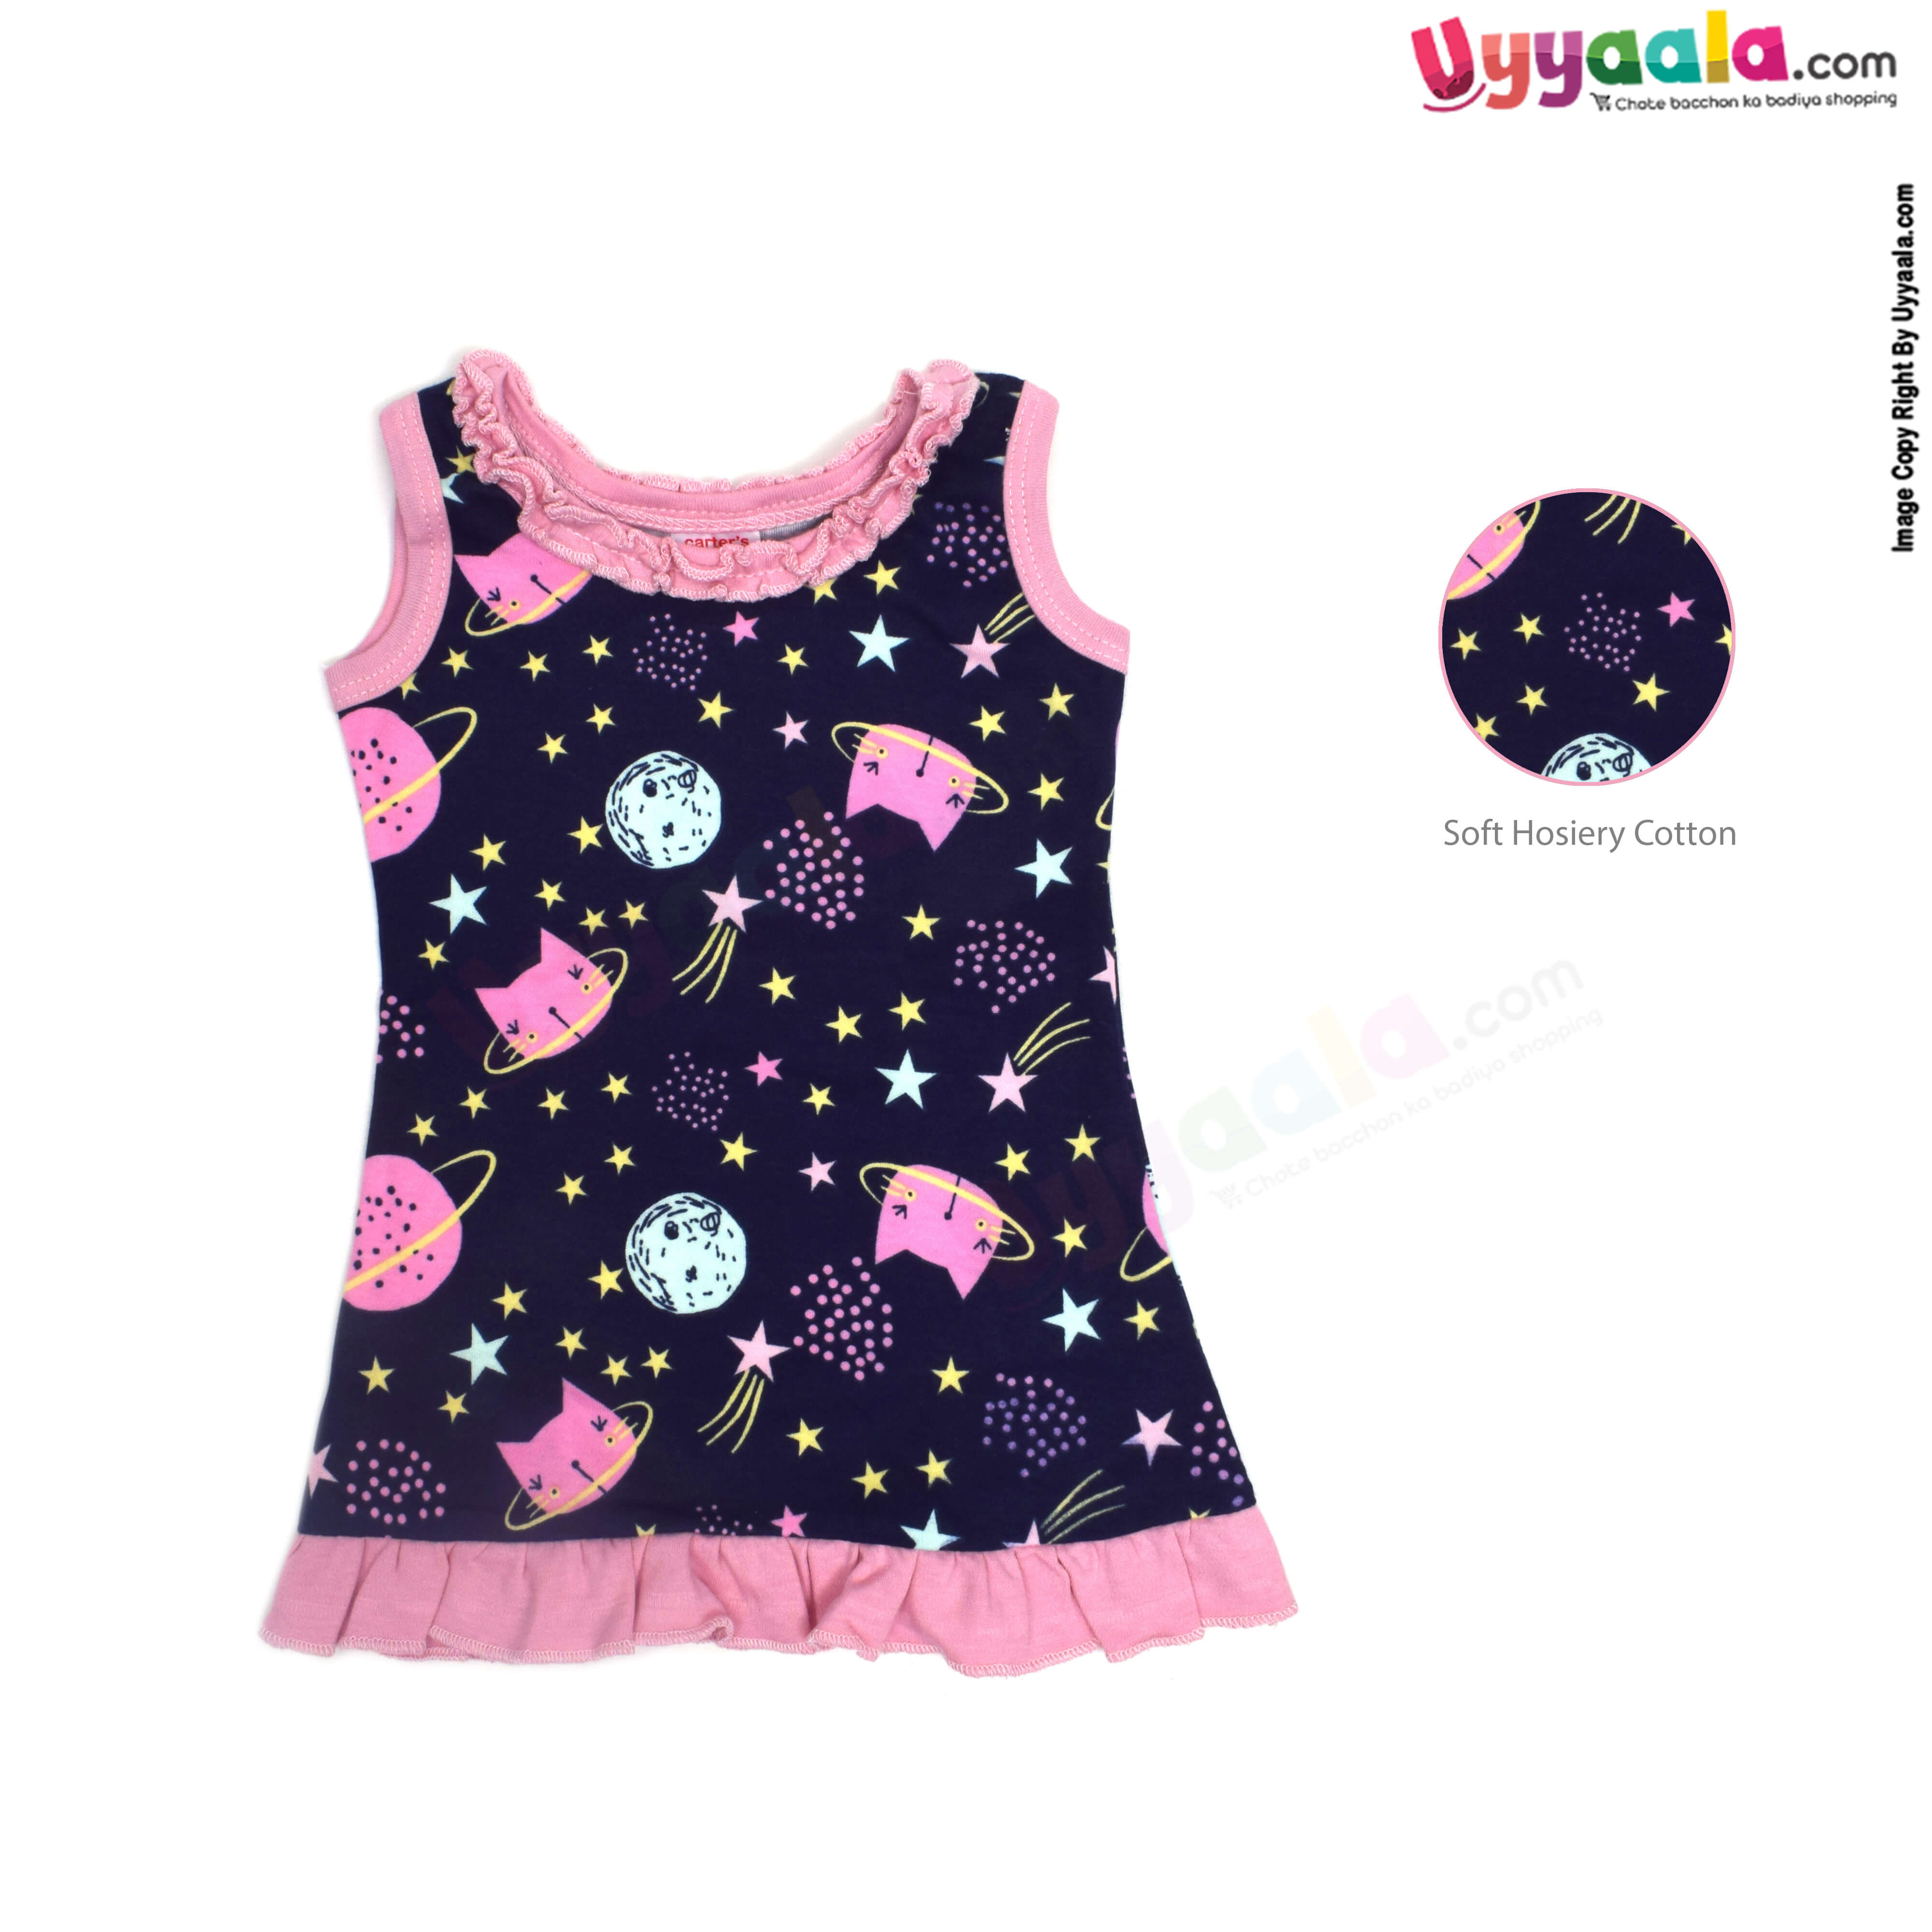 Baby 100% Premium Quality Hoisery Sleeve less Newborn Frock with Bloomer Stars & Planet Print, Voilet